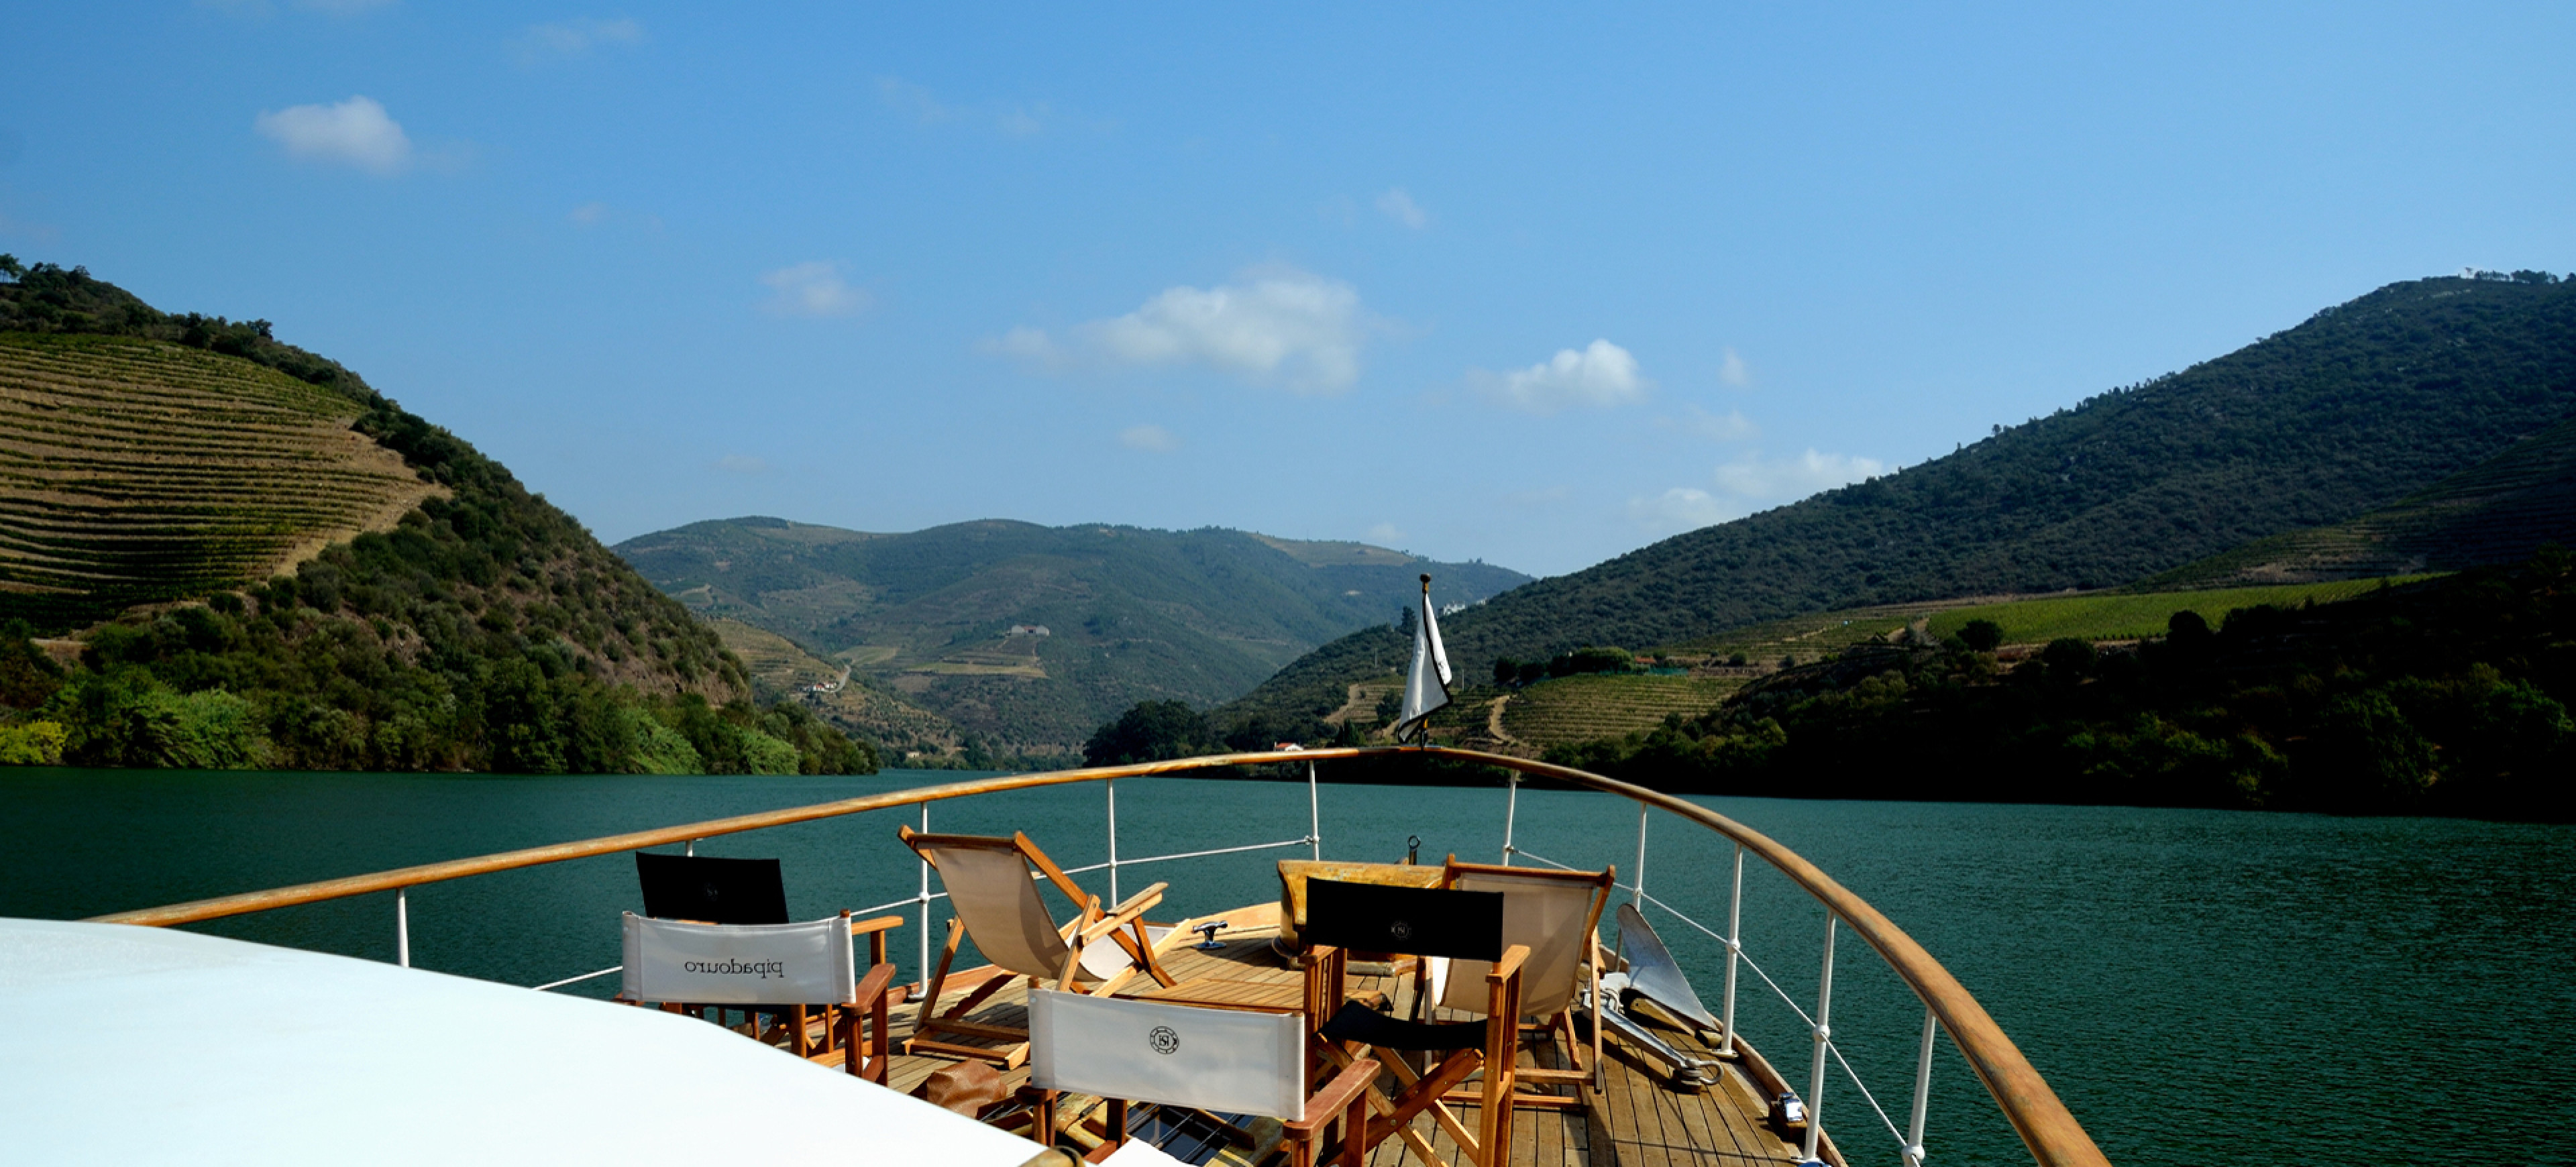 A day in the Douro Valley